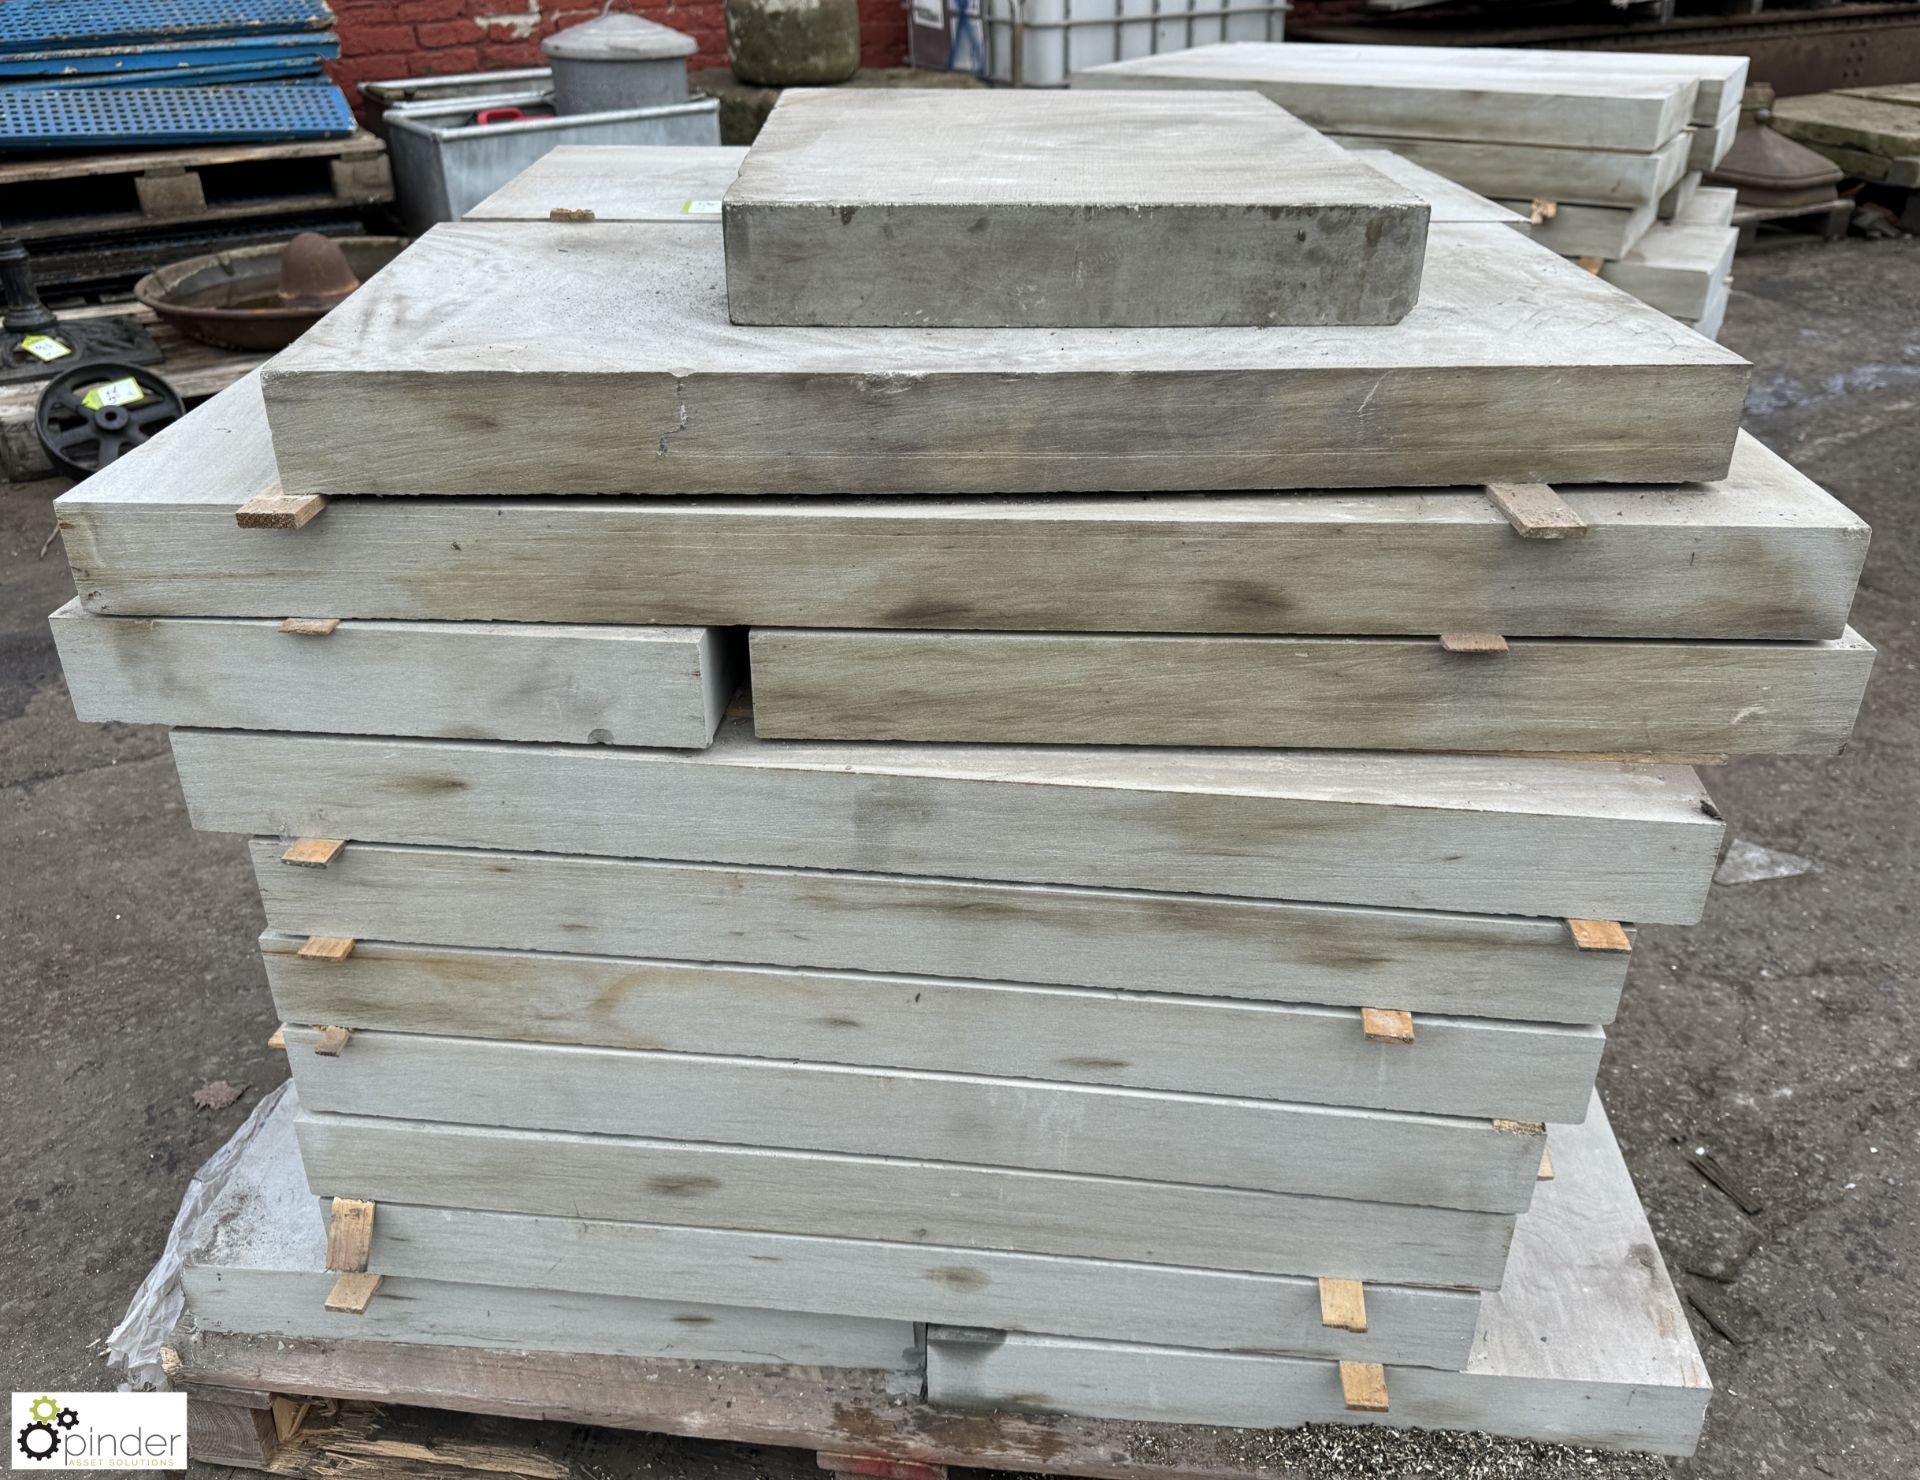 Pallet Sandstone Slabs from Millstone grit, various lengths x 450mm x 75mm - Image 4 of 6